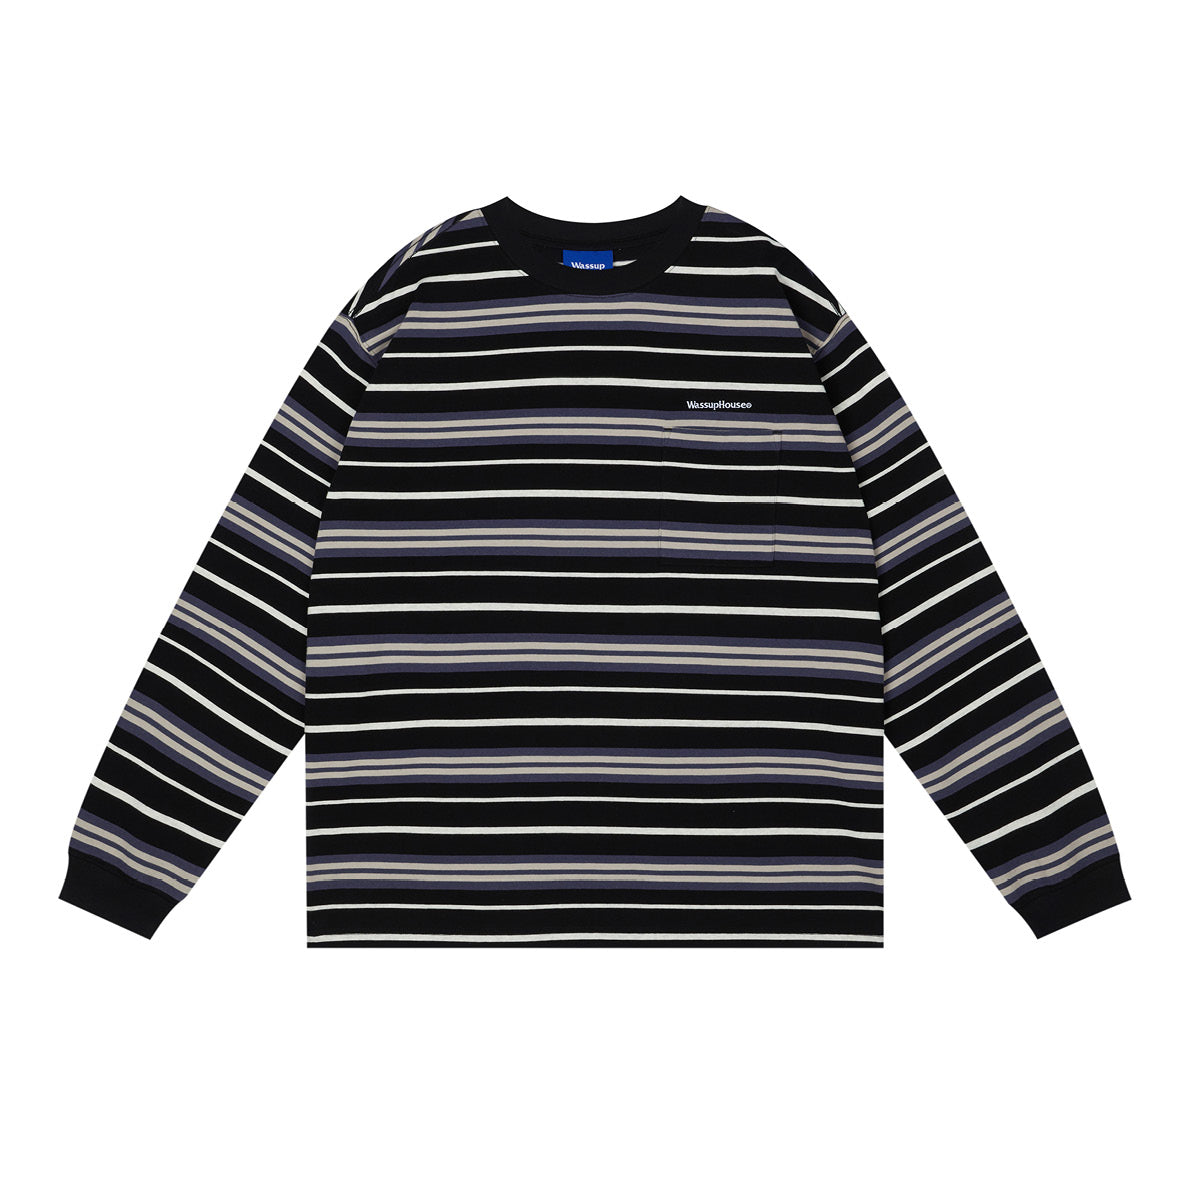 Wassup House Multi Color Striped Long Sleeved Tee